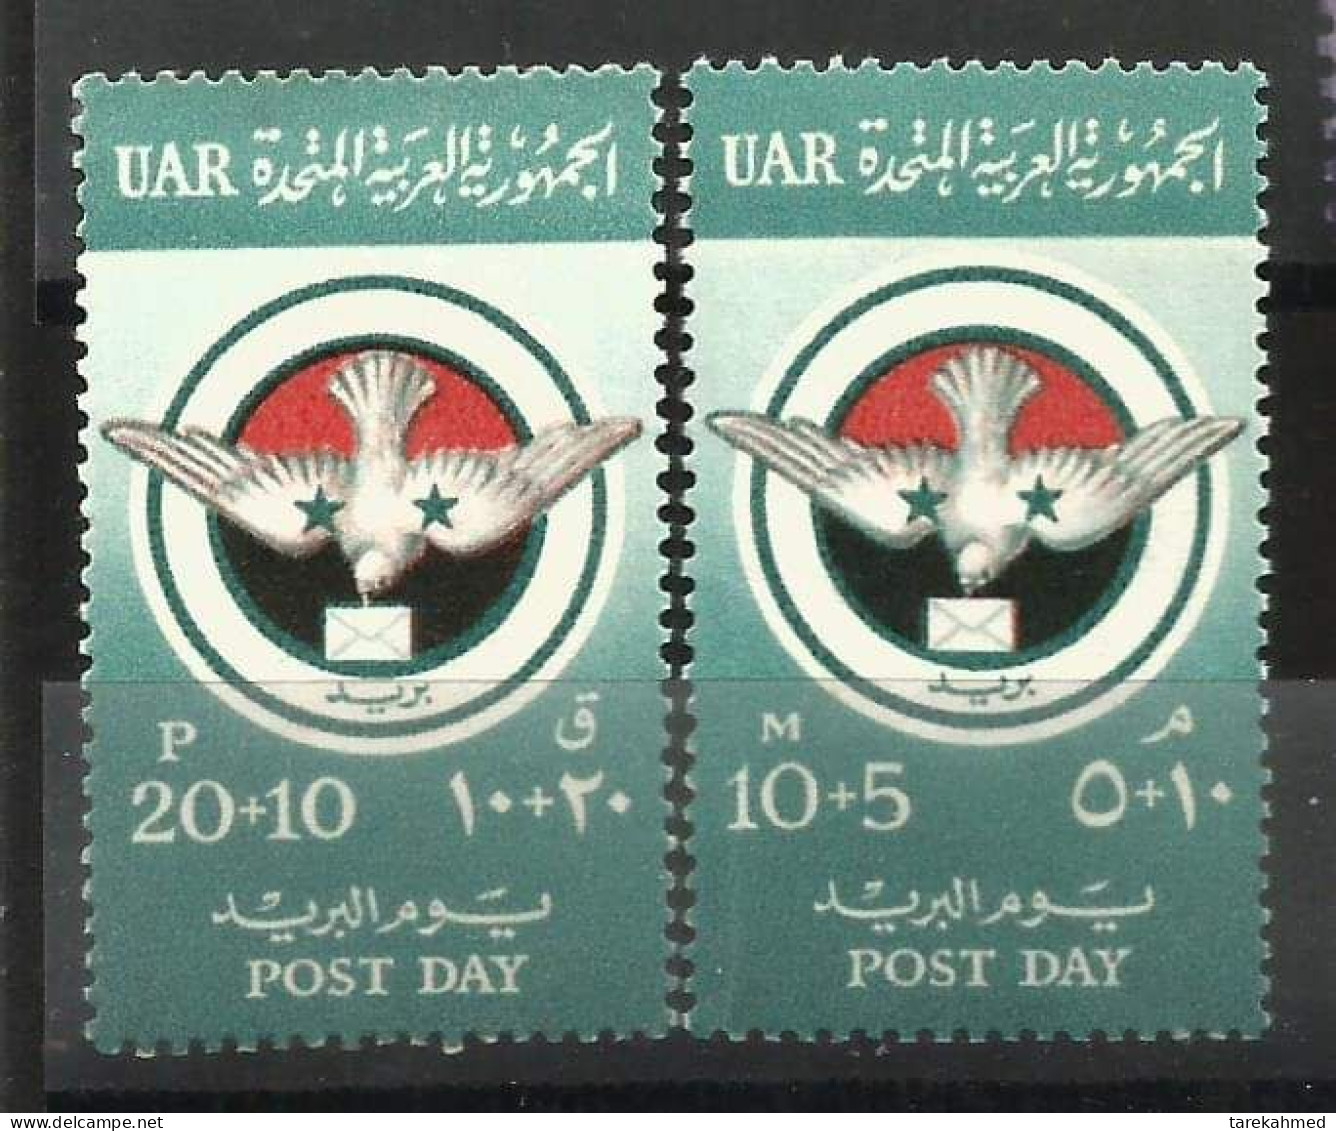 EGYPT (U.A.R) 1959 - Sc B18, Post Day, Both The Egyptian And The Syrian Issues, MNH, Original Gum - Neufs